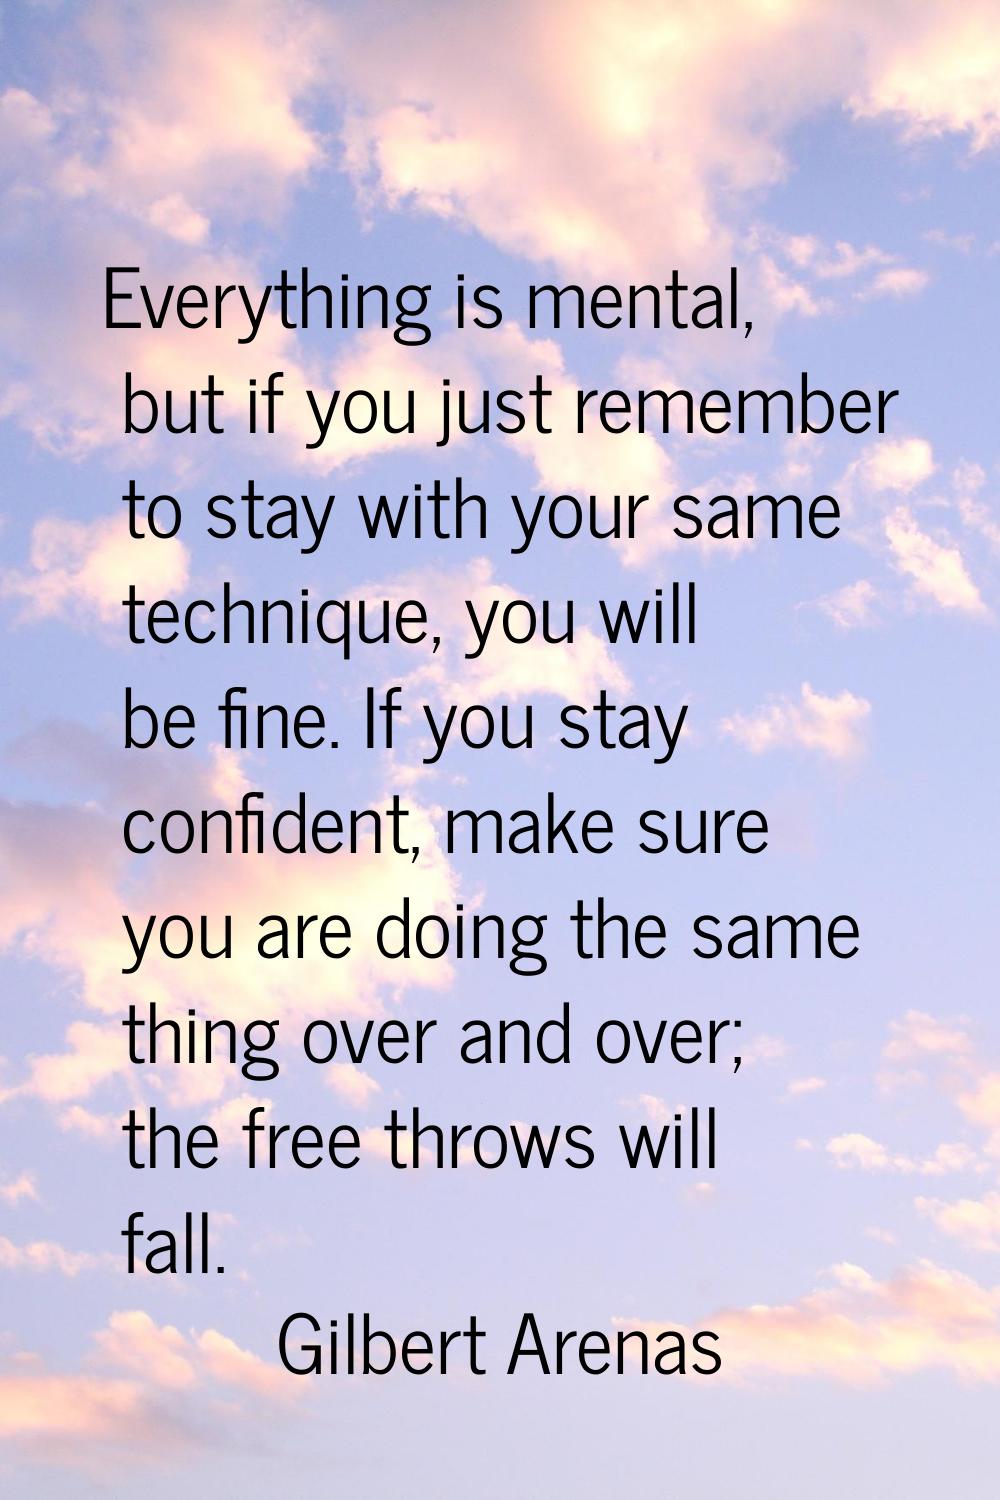 Everything is mental, but if you just remember to stay with your same technique, you will be fine. 